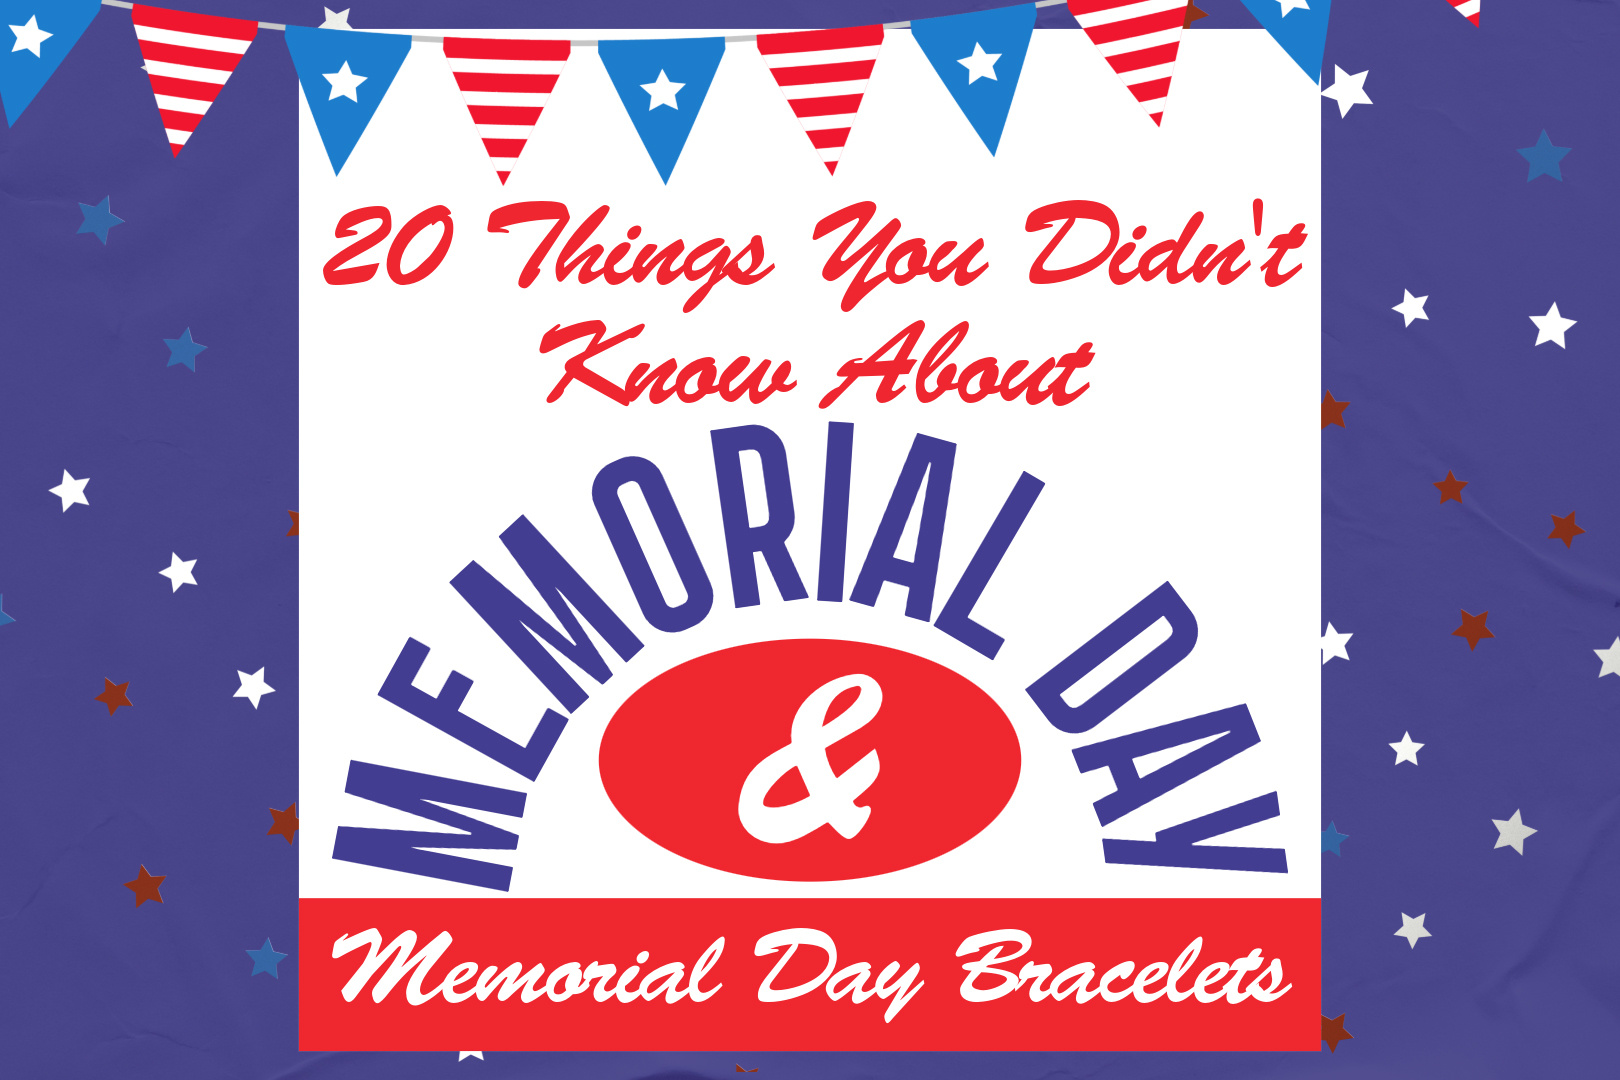 20 Things You Didn't Know About Memorial Day & Memorial Day Bracelets